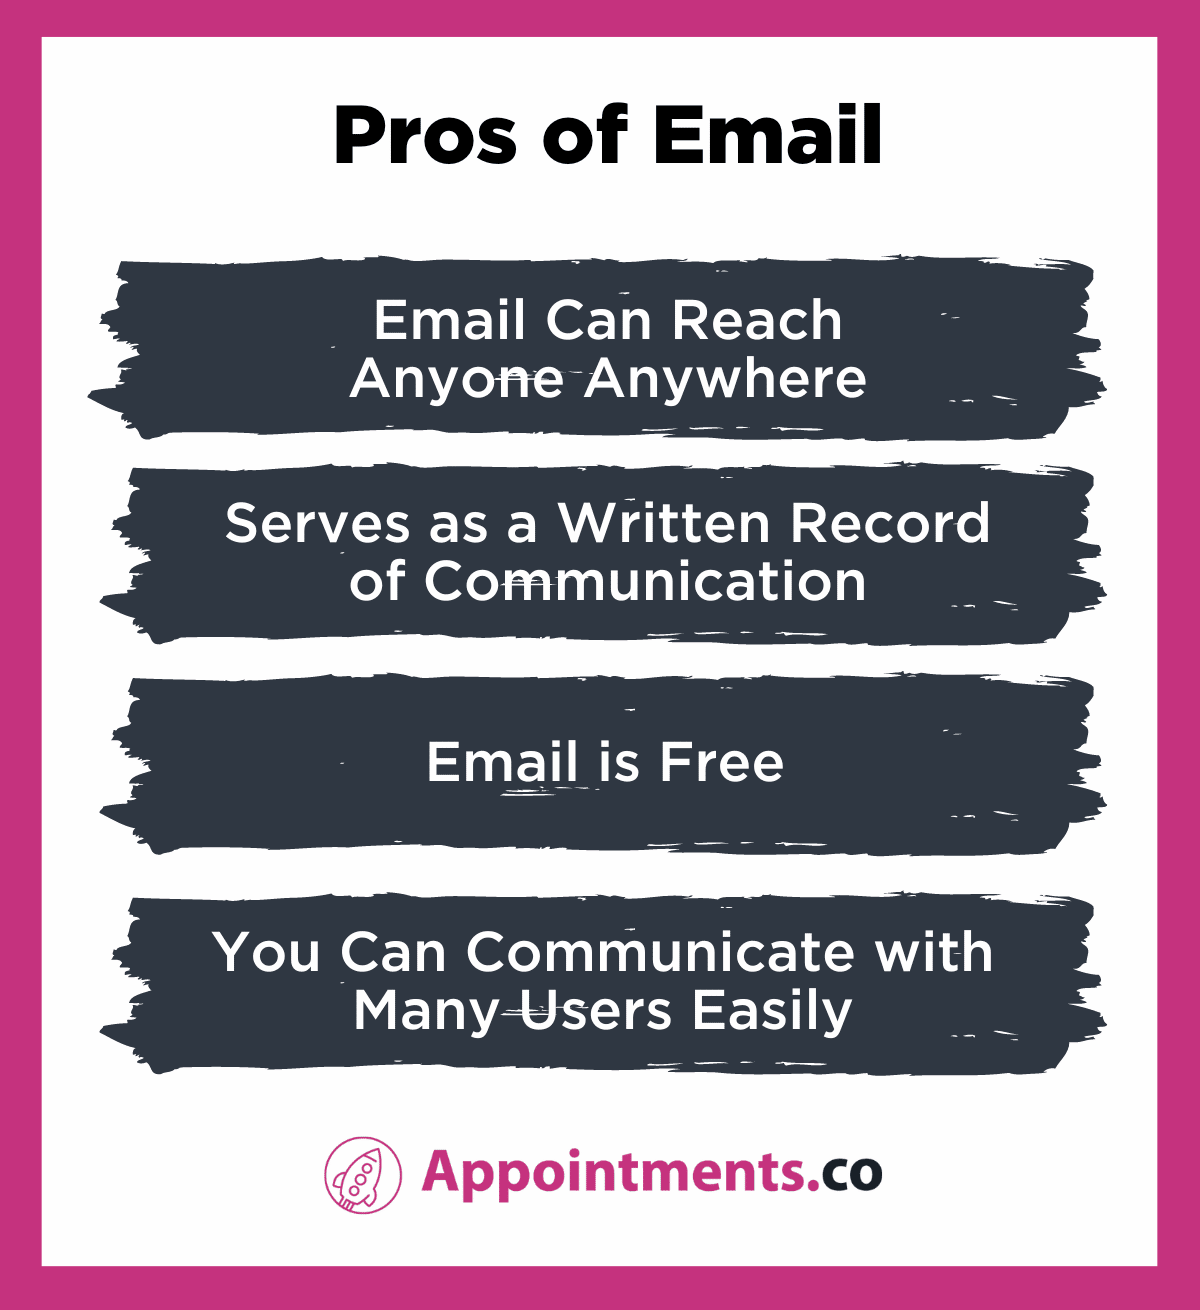 Email vs Phone Call - Pros of Email